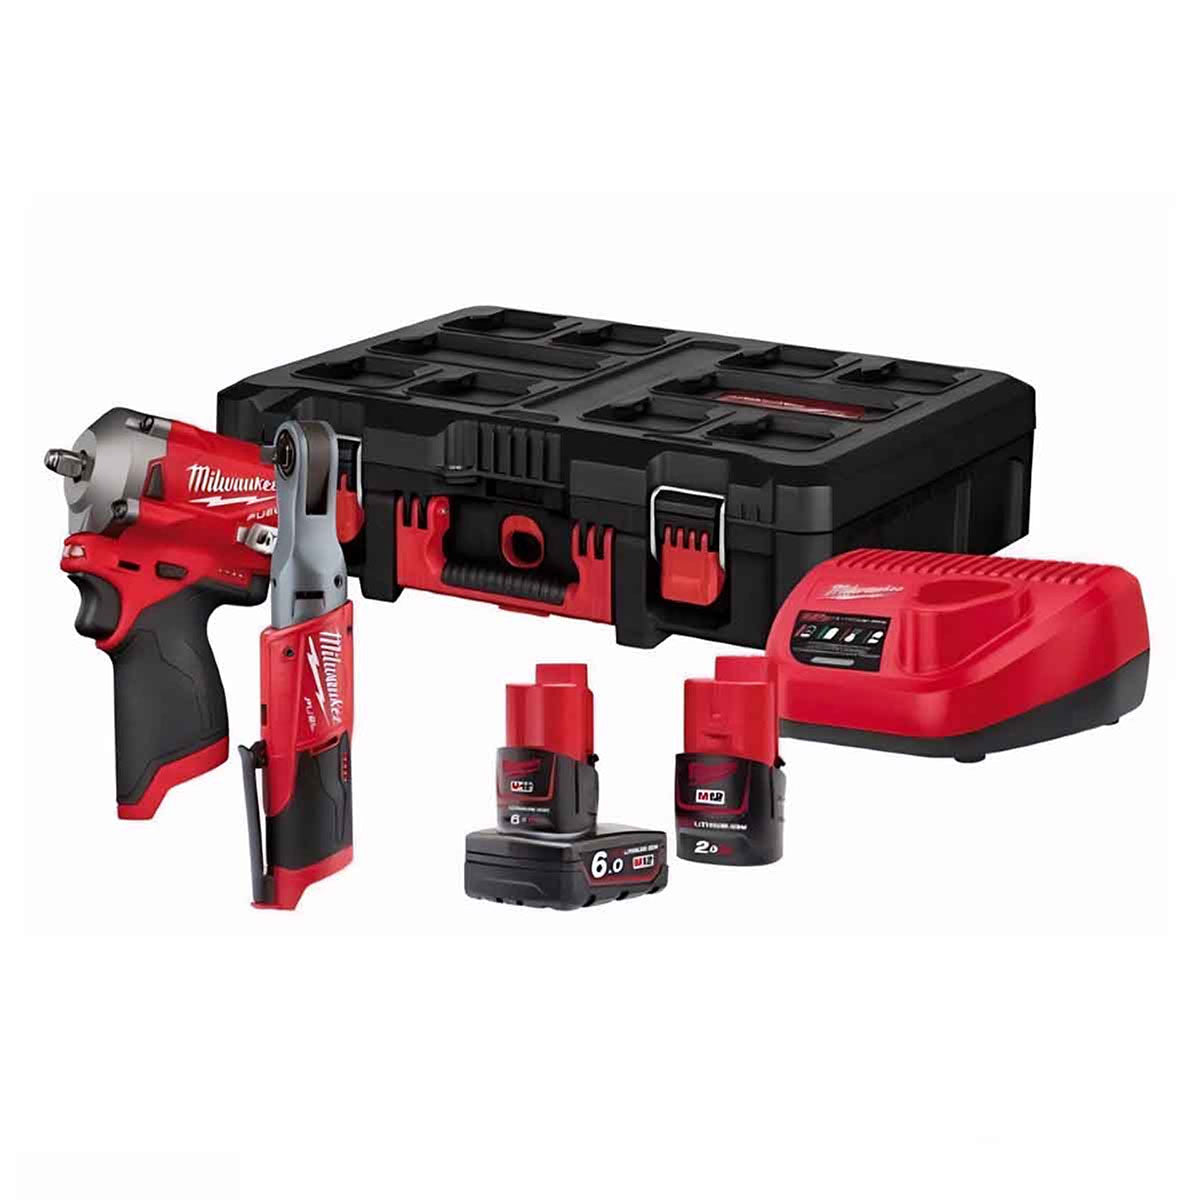 Milwaukee M12 FPP2H-622P 12V Fuel Brushless 3/8" Impact Wrench and Ratchet with 2 x Battery Charge & Case 4933471743